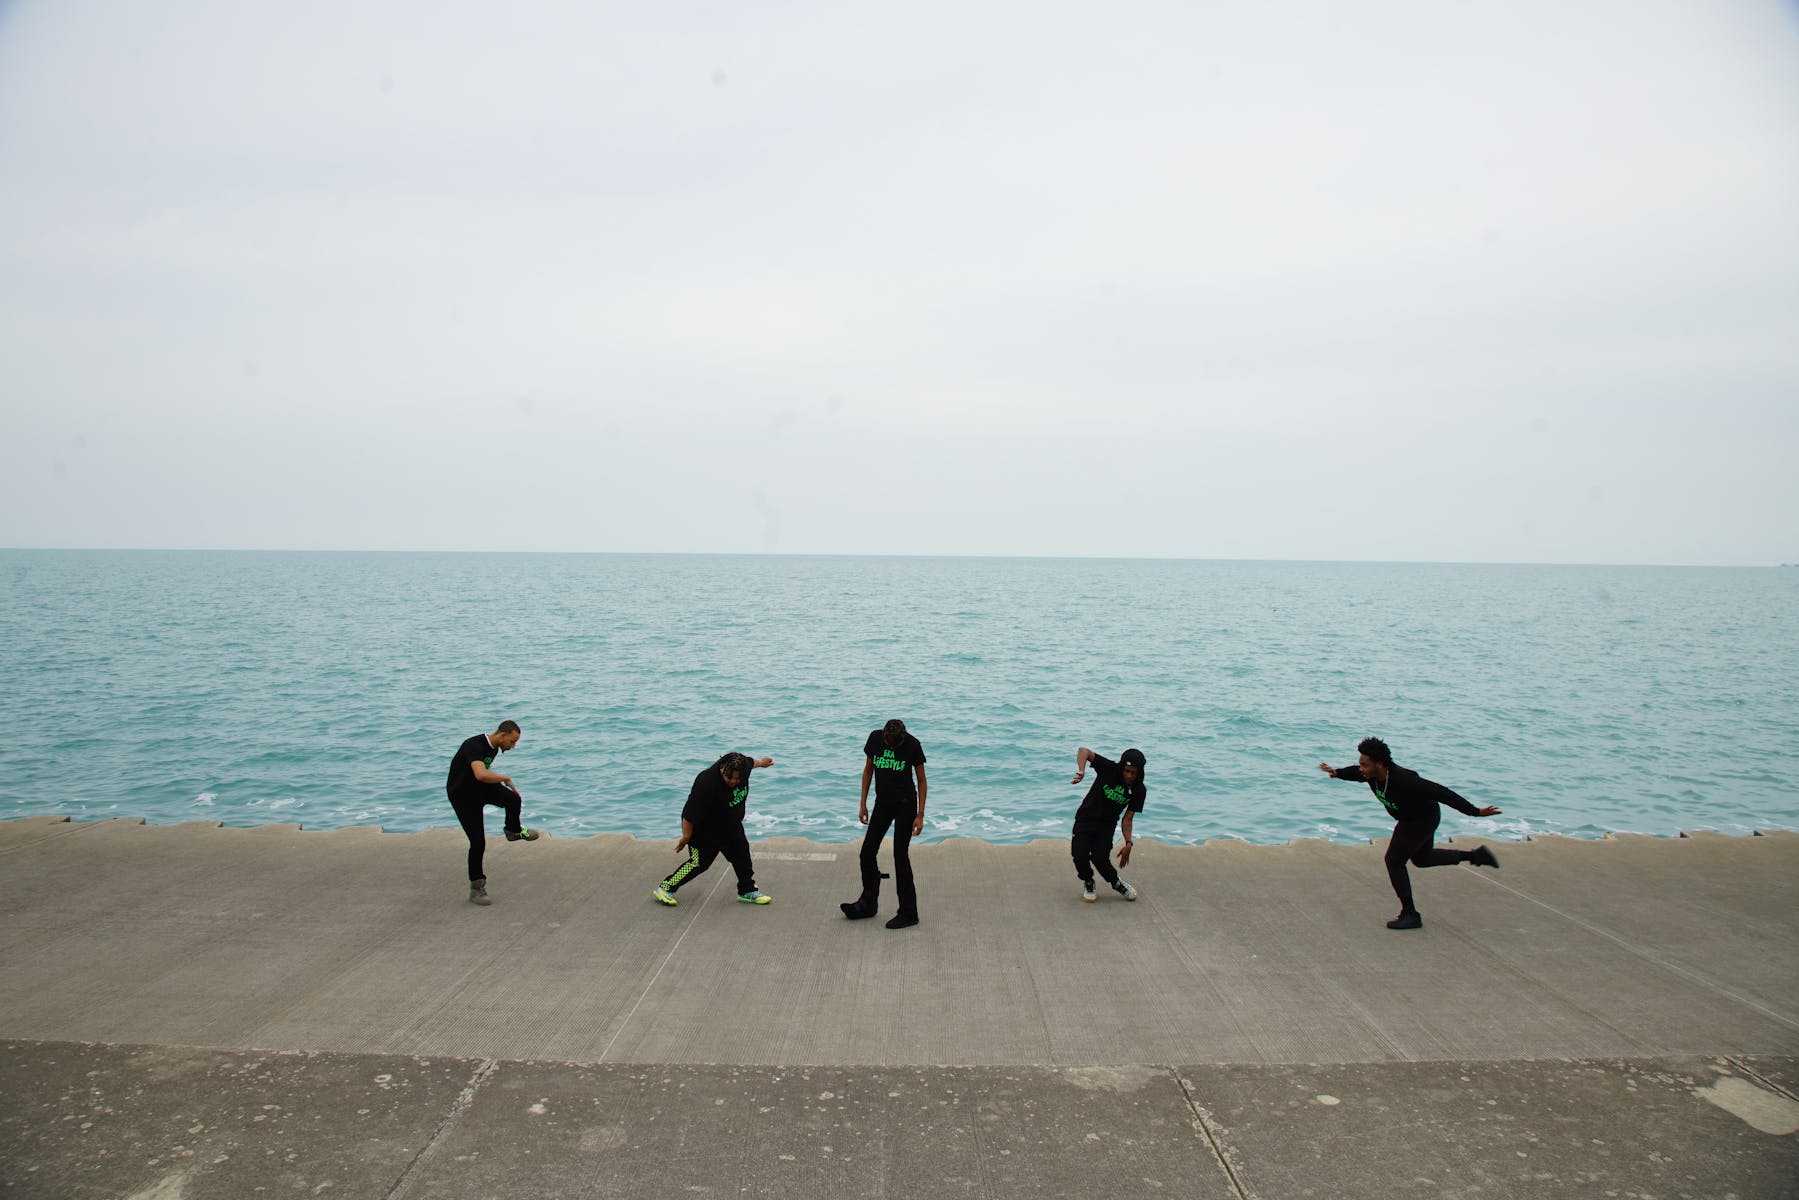 Image of five dancers on a concrete boardwalk with the sea in the background